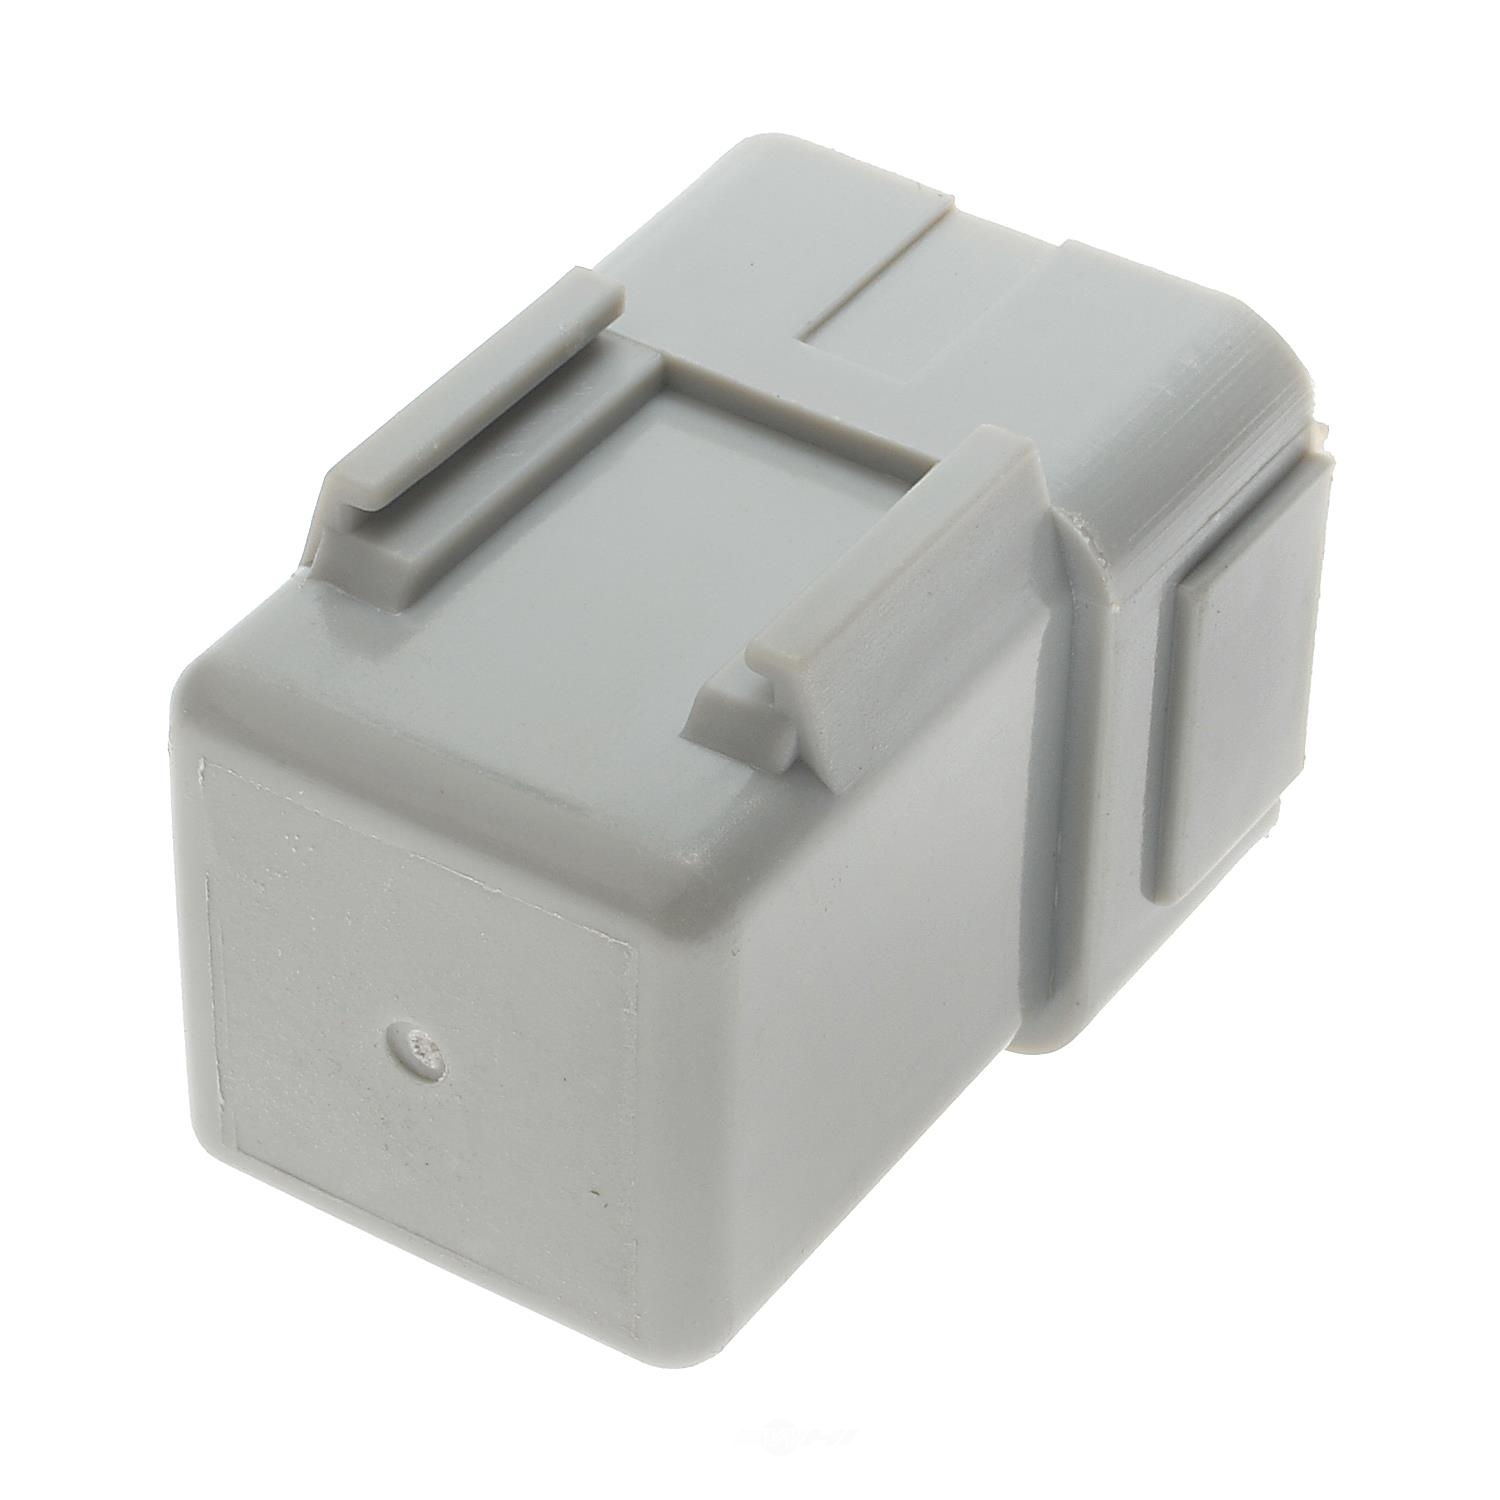 STANDARD T-SERIES - Auto Trans Spark Control Relay - STT RY27T